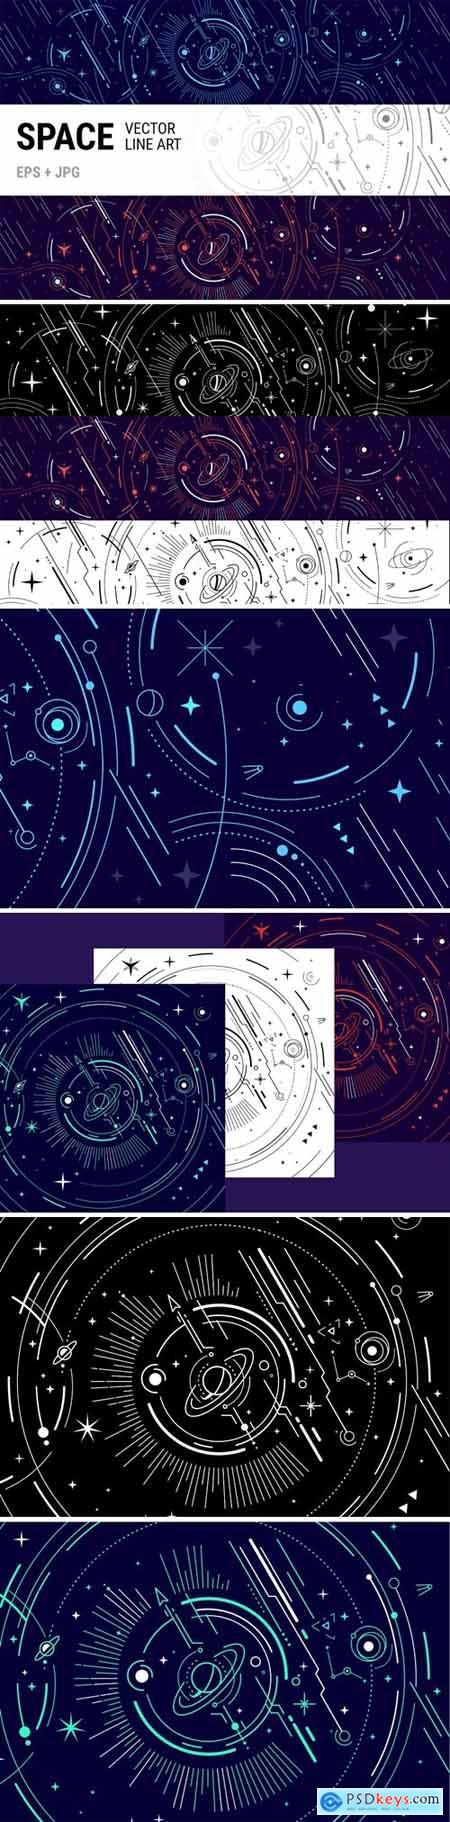 Abstract Space - Line Art Set